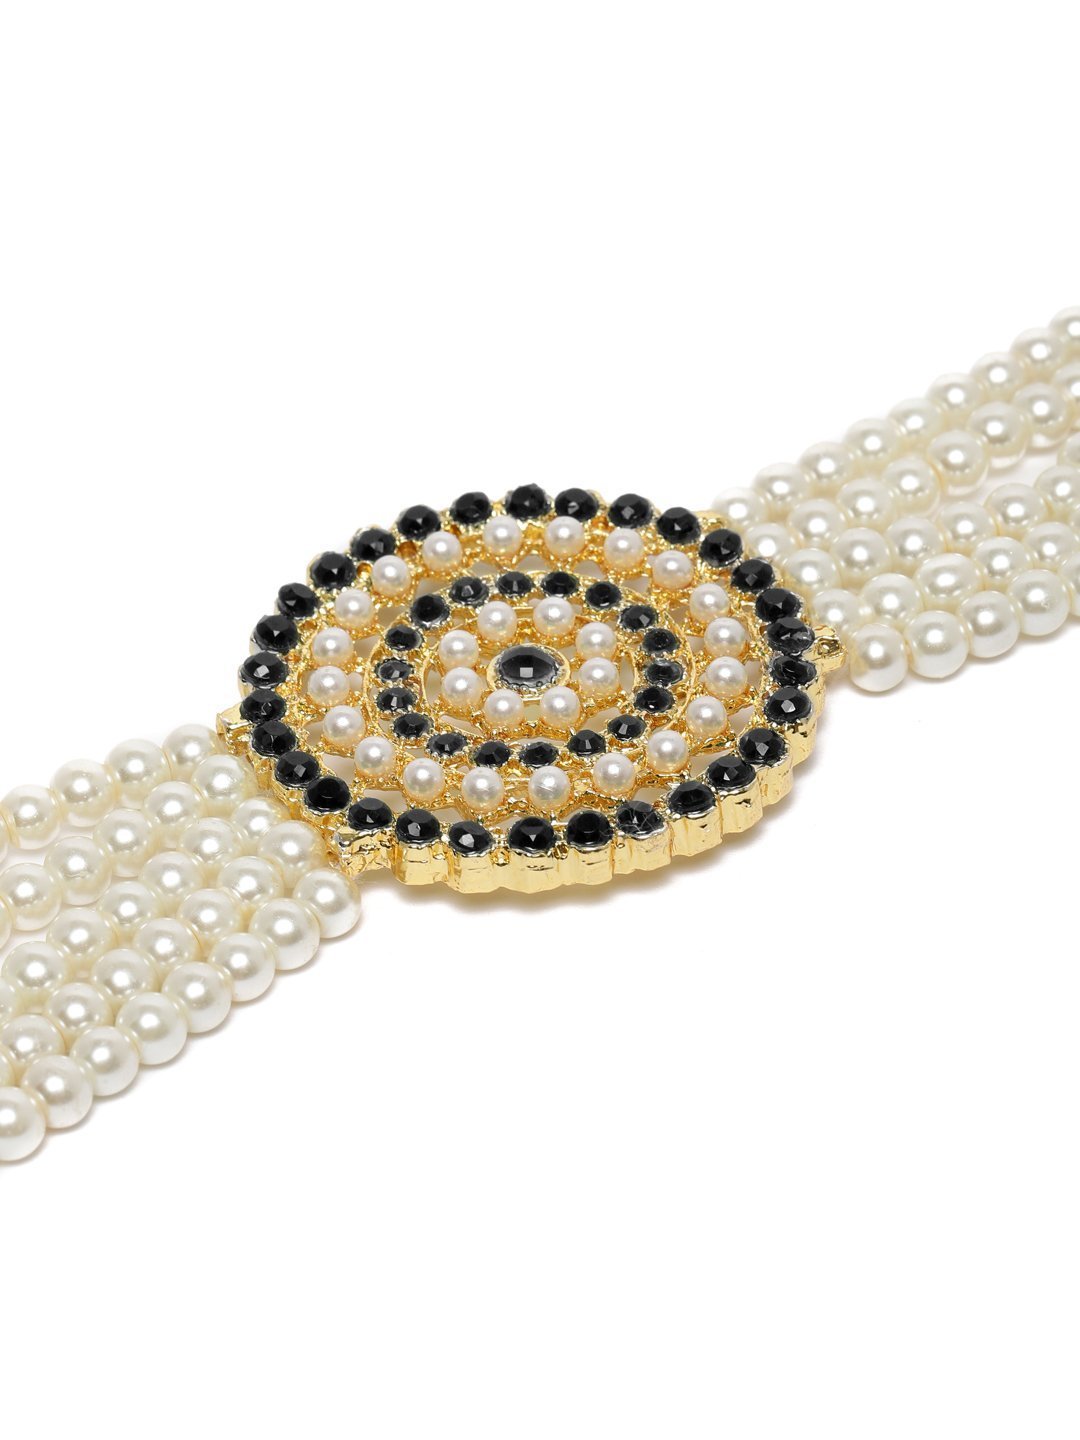 Women's Gold Plated White & Black Light Weight Pearl Beaded Choker Necklace Set - i jewels